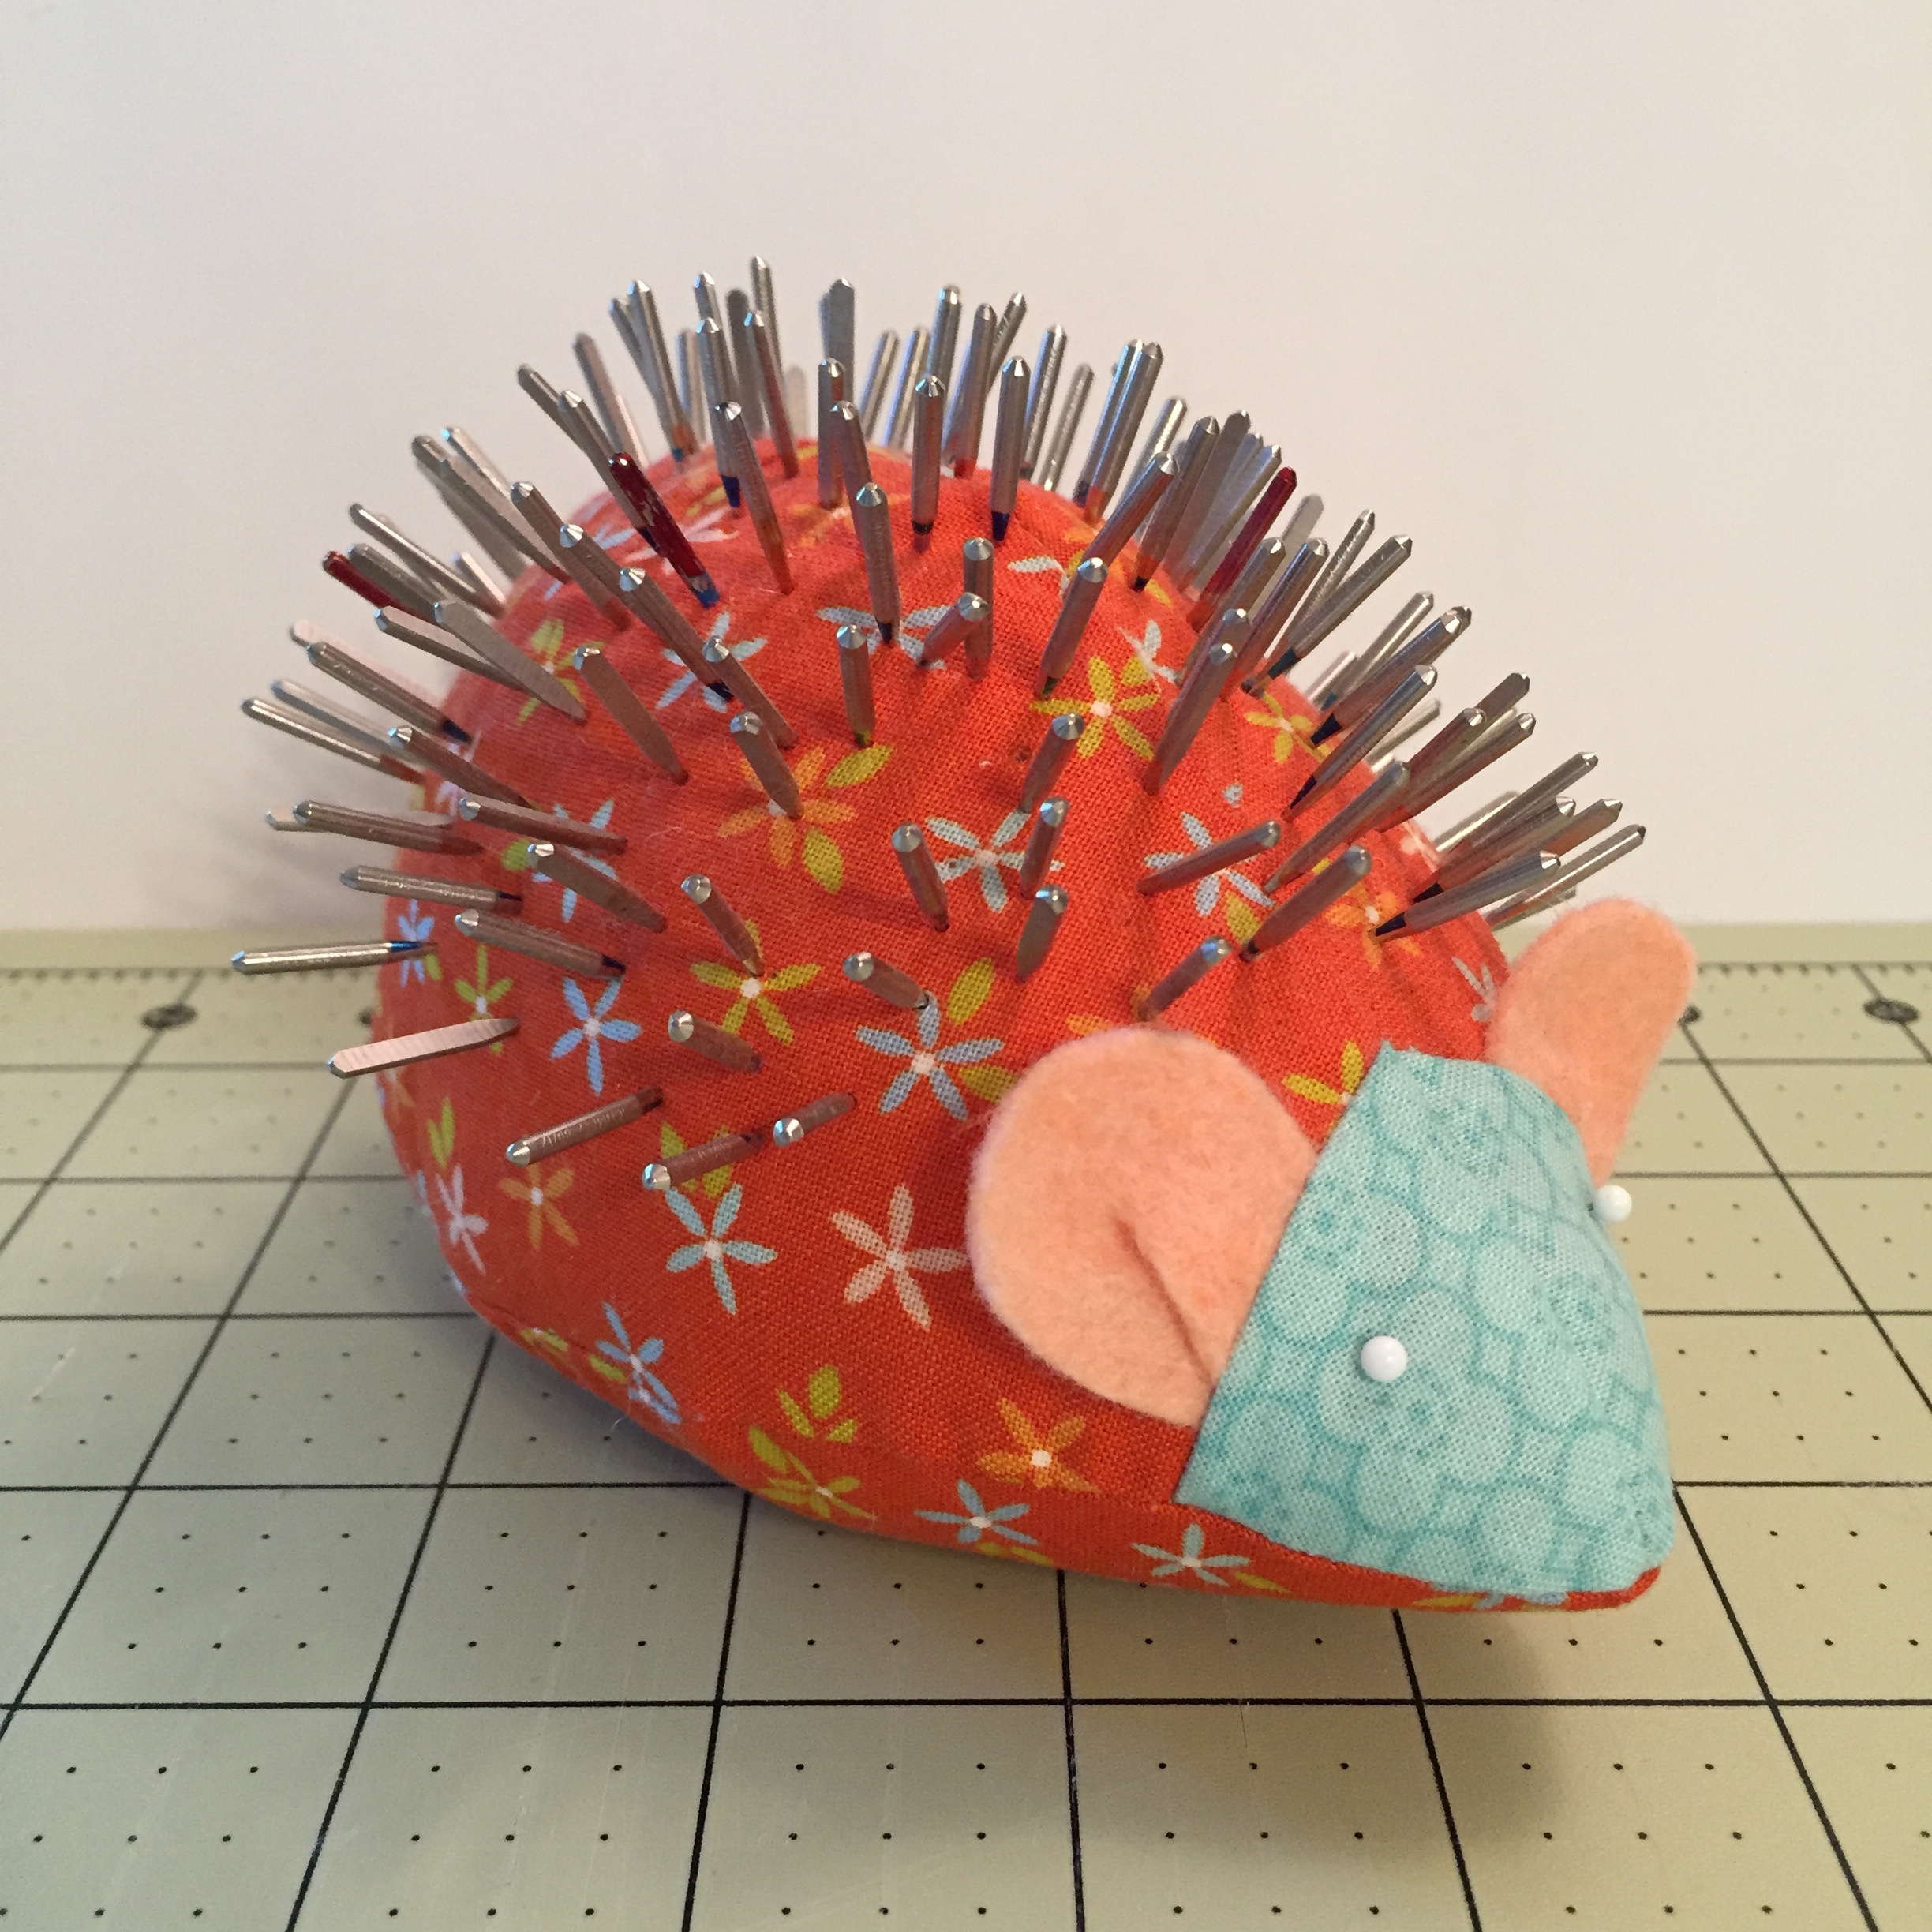 Hedgie Pincushion made with orange fabric is full of used sewing machine needles.